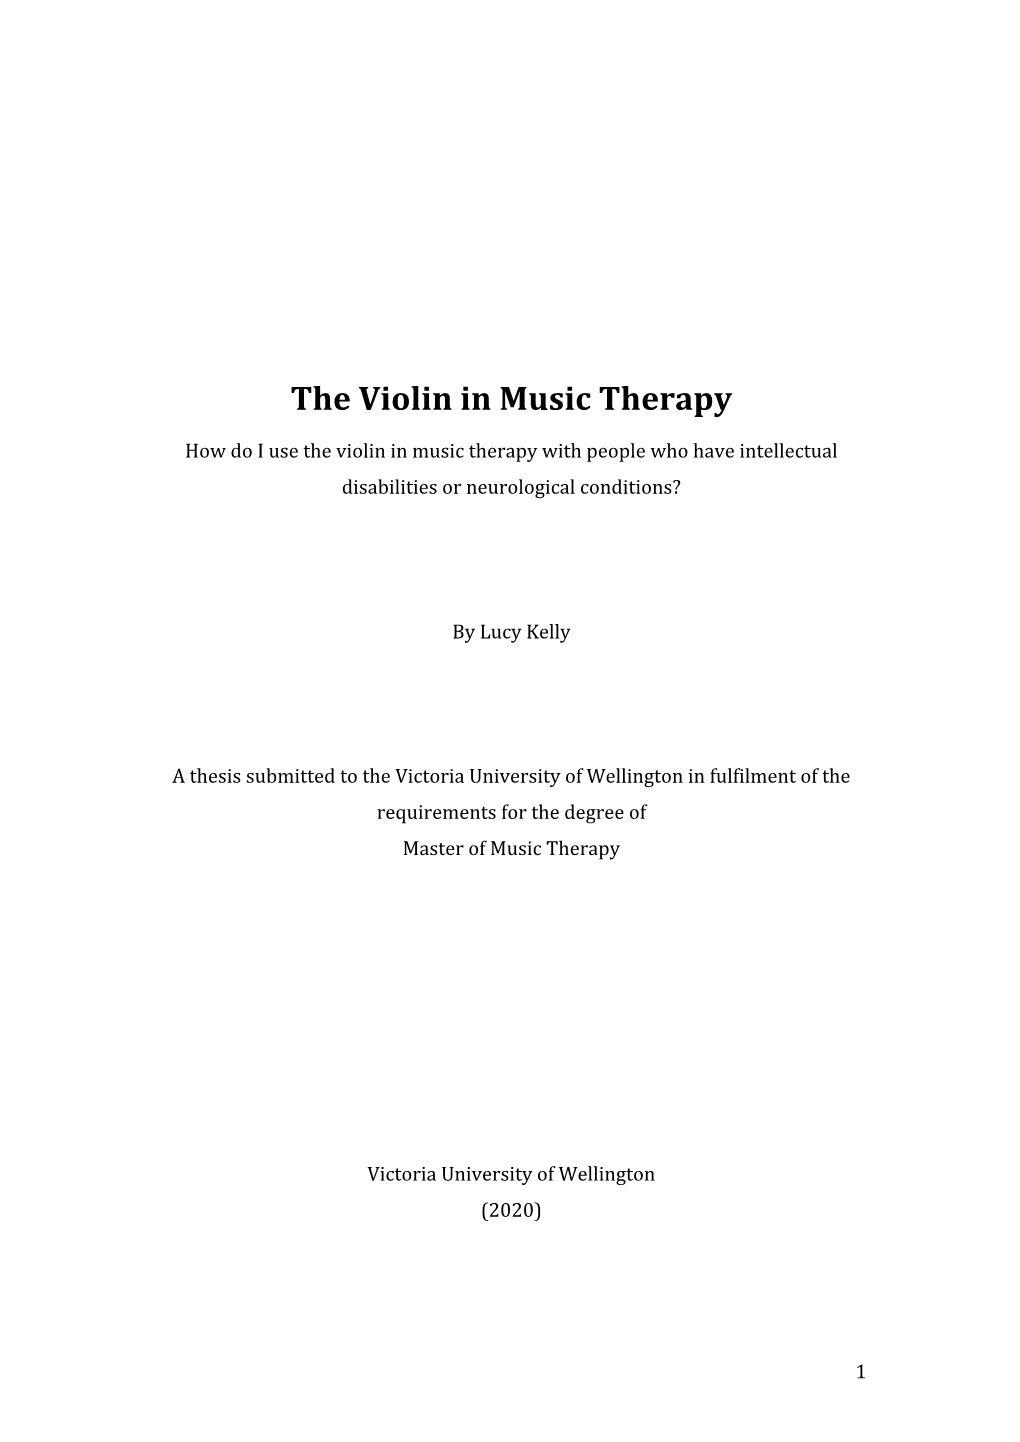 The Violin in Music Therapy